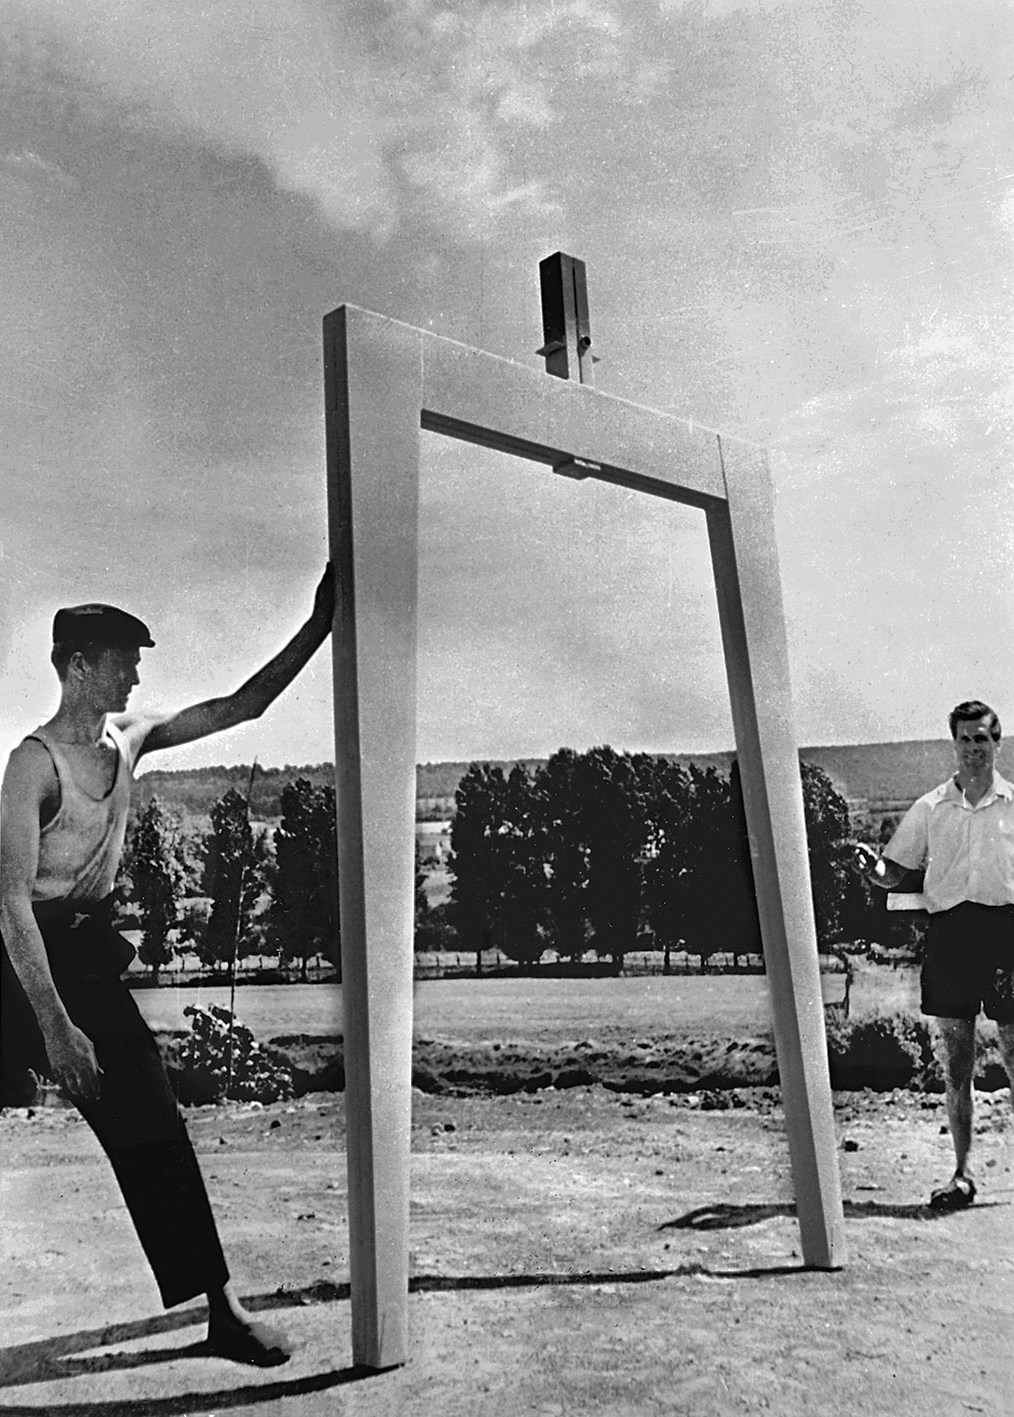 Pierre Prouvé and a worker displaying a Metropole house portal frame, Maxéville, ca. 1950.